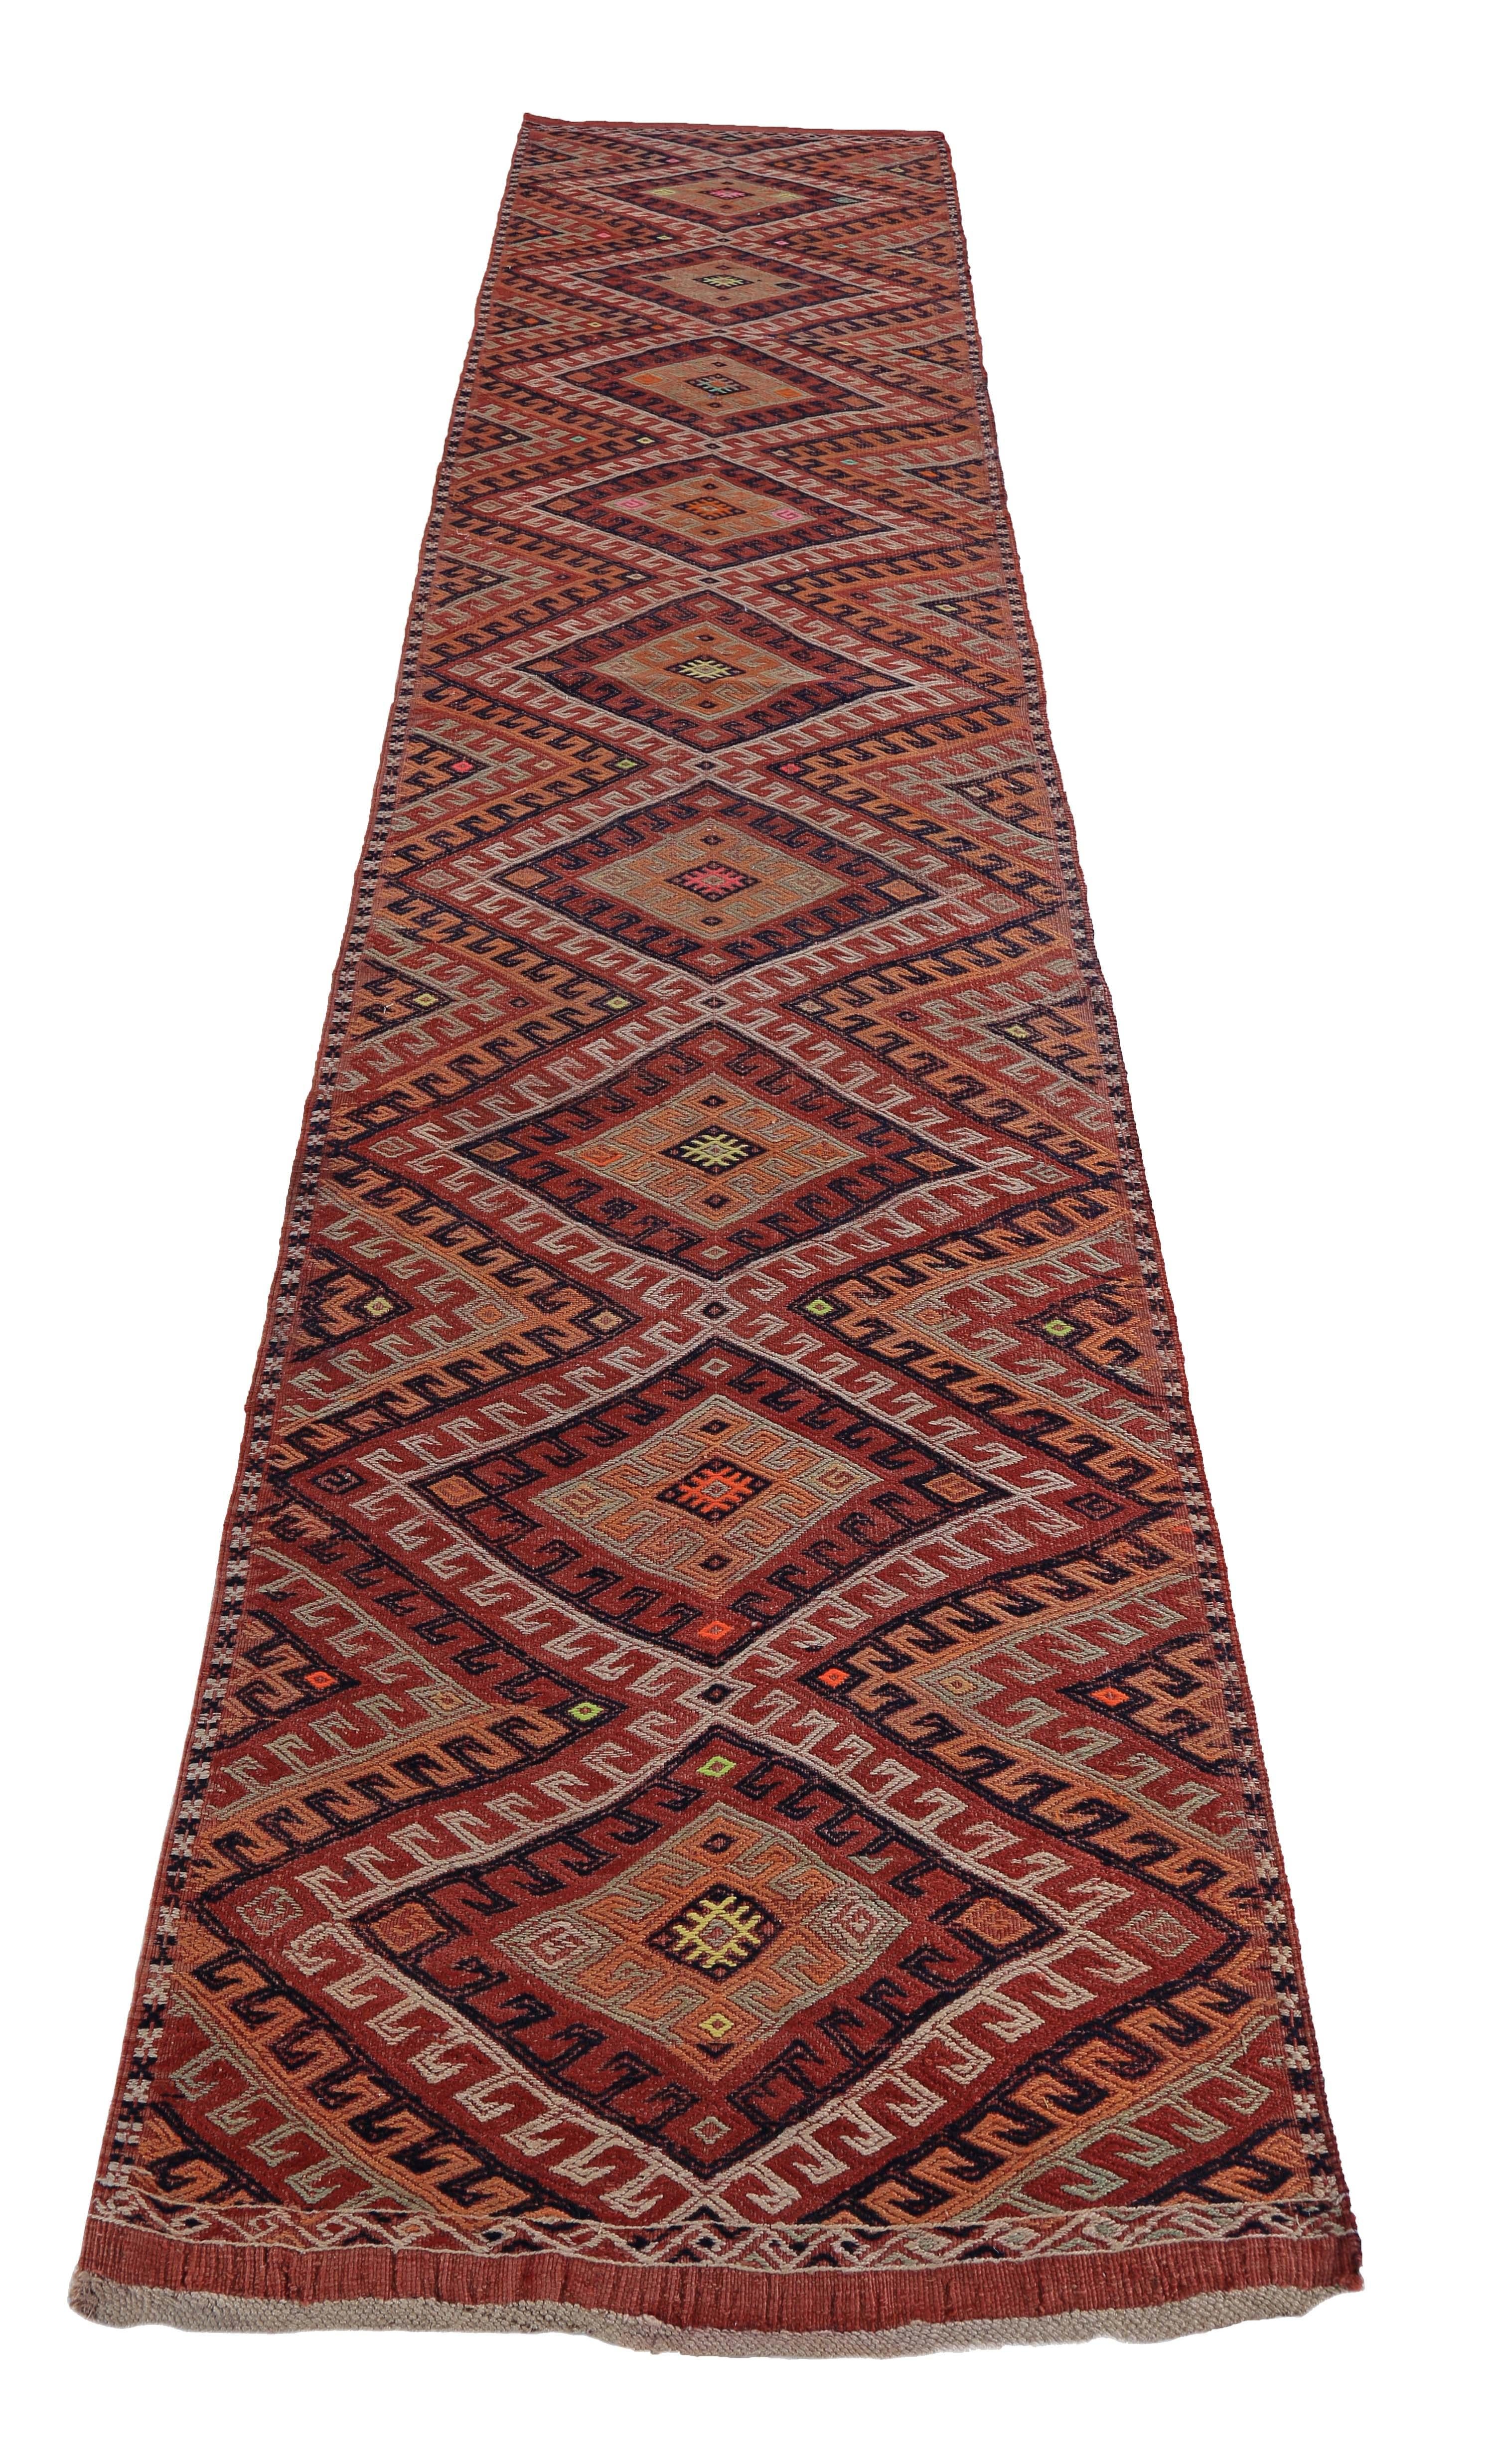 Turkish runner rug handwoven from the finest sheep’s wool and colored with all-natural vegetable dyes that are safe for humans and pets. It’s a traditional Kilim flat-weave design featuring red, orange and ivory tribal patterns. It’s a stunning